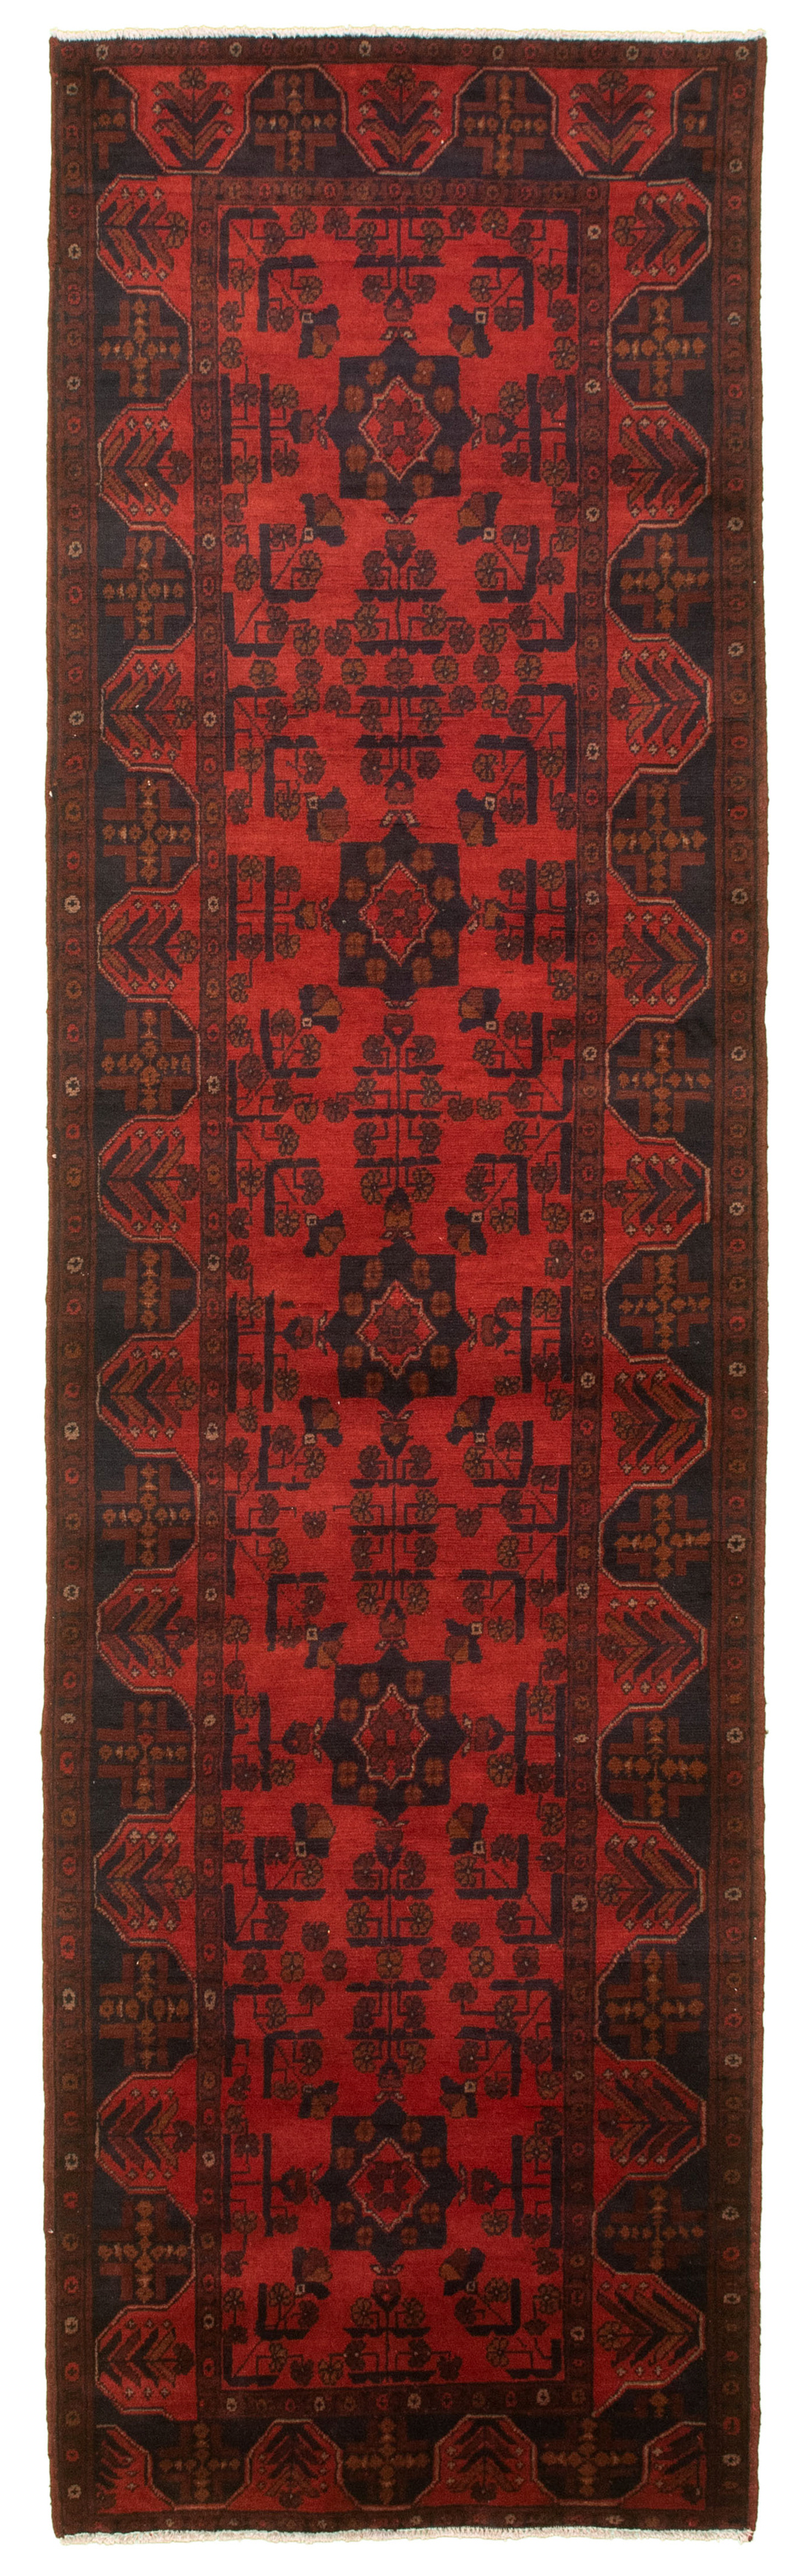 Hand-knotted Finest Khal Mohammadi Red  Rug 2'10" x 9'8" Size: 2'10" x 9'8"  